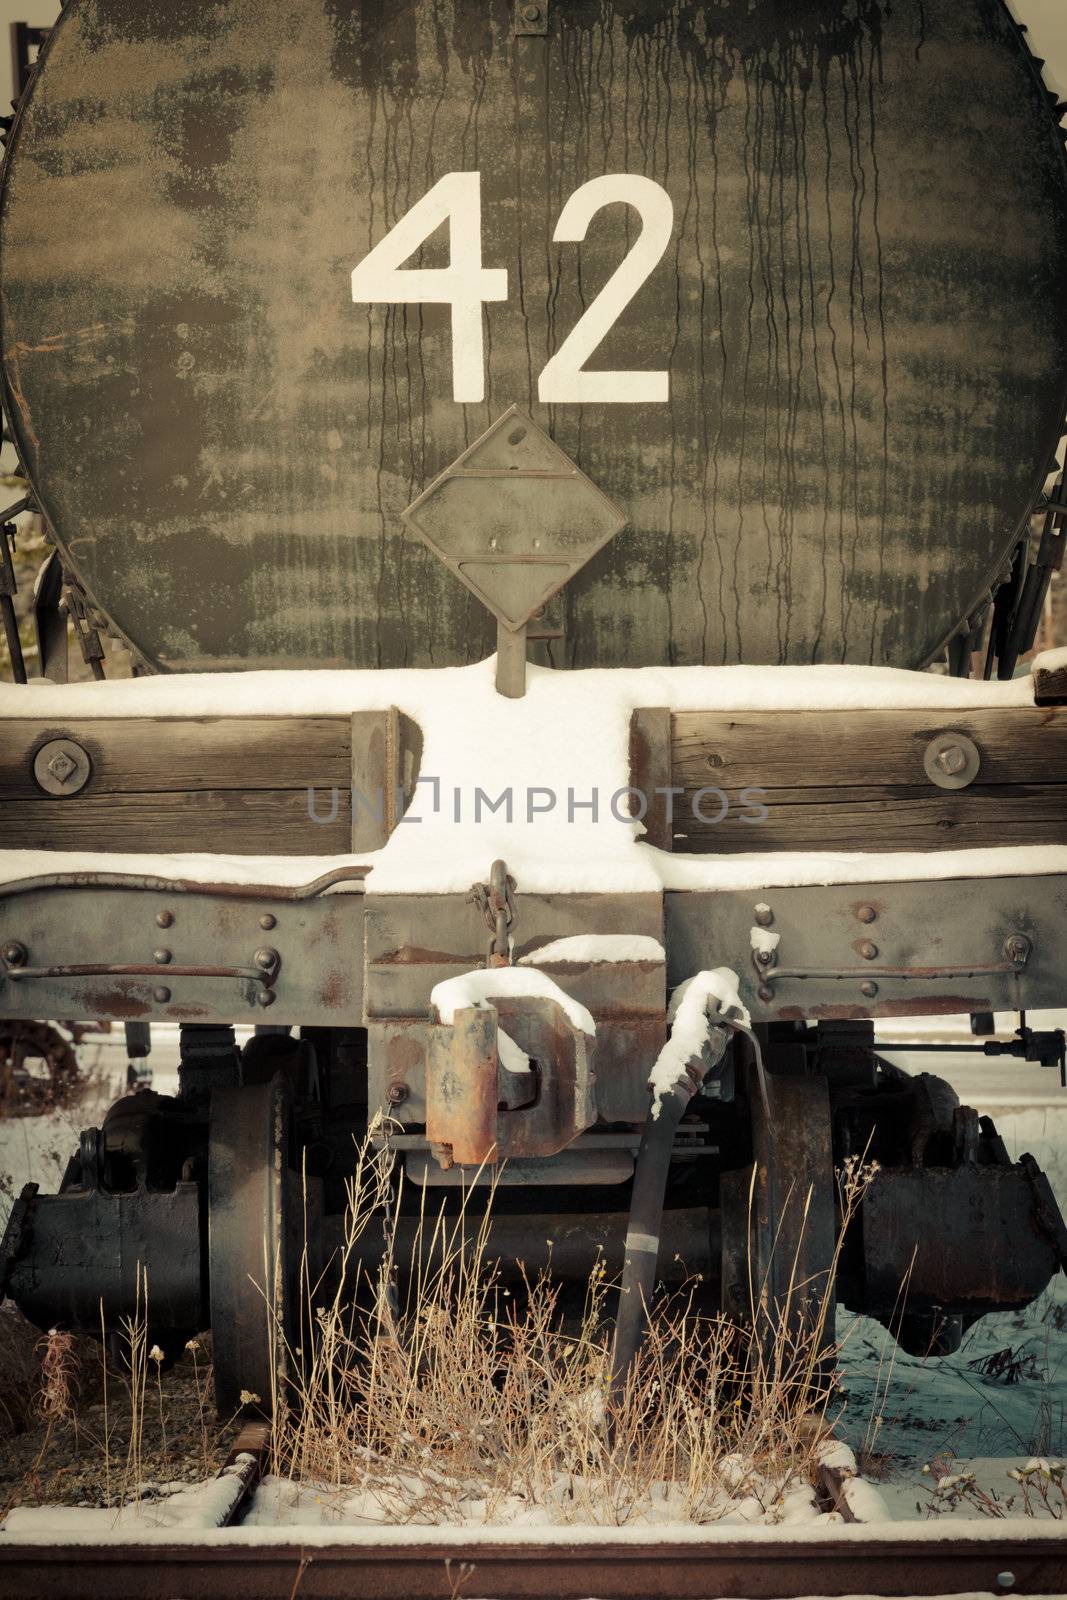 Moble photography lo-fi styled image of old obsolete railway tanker car in snowy winter with 42 written on it.